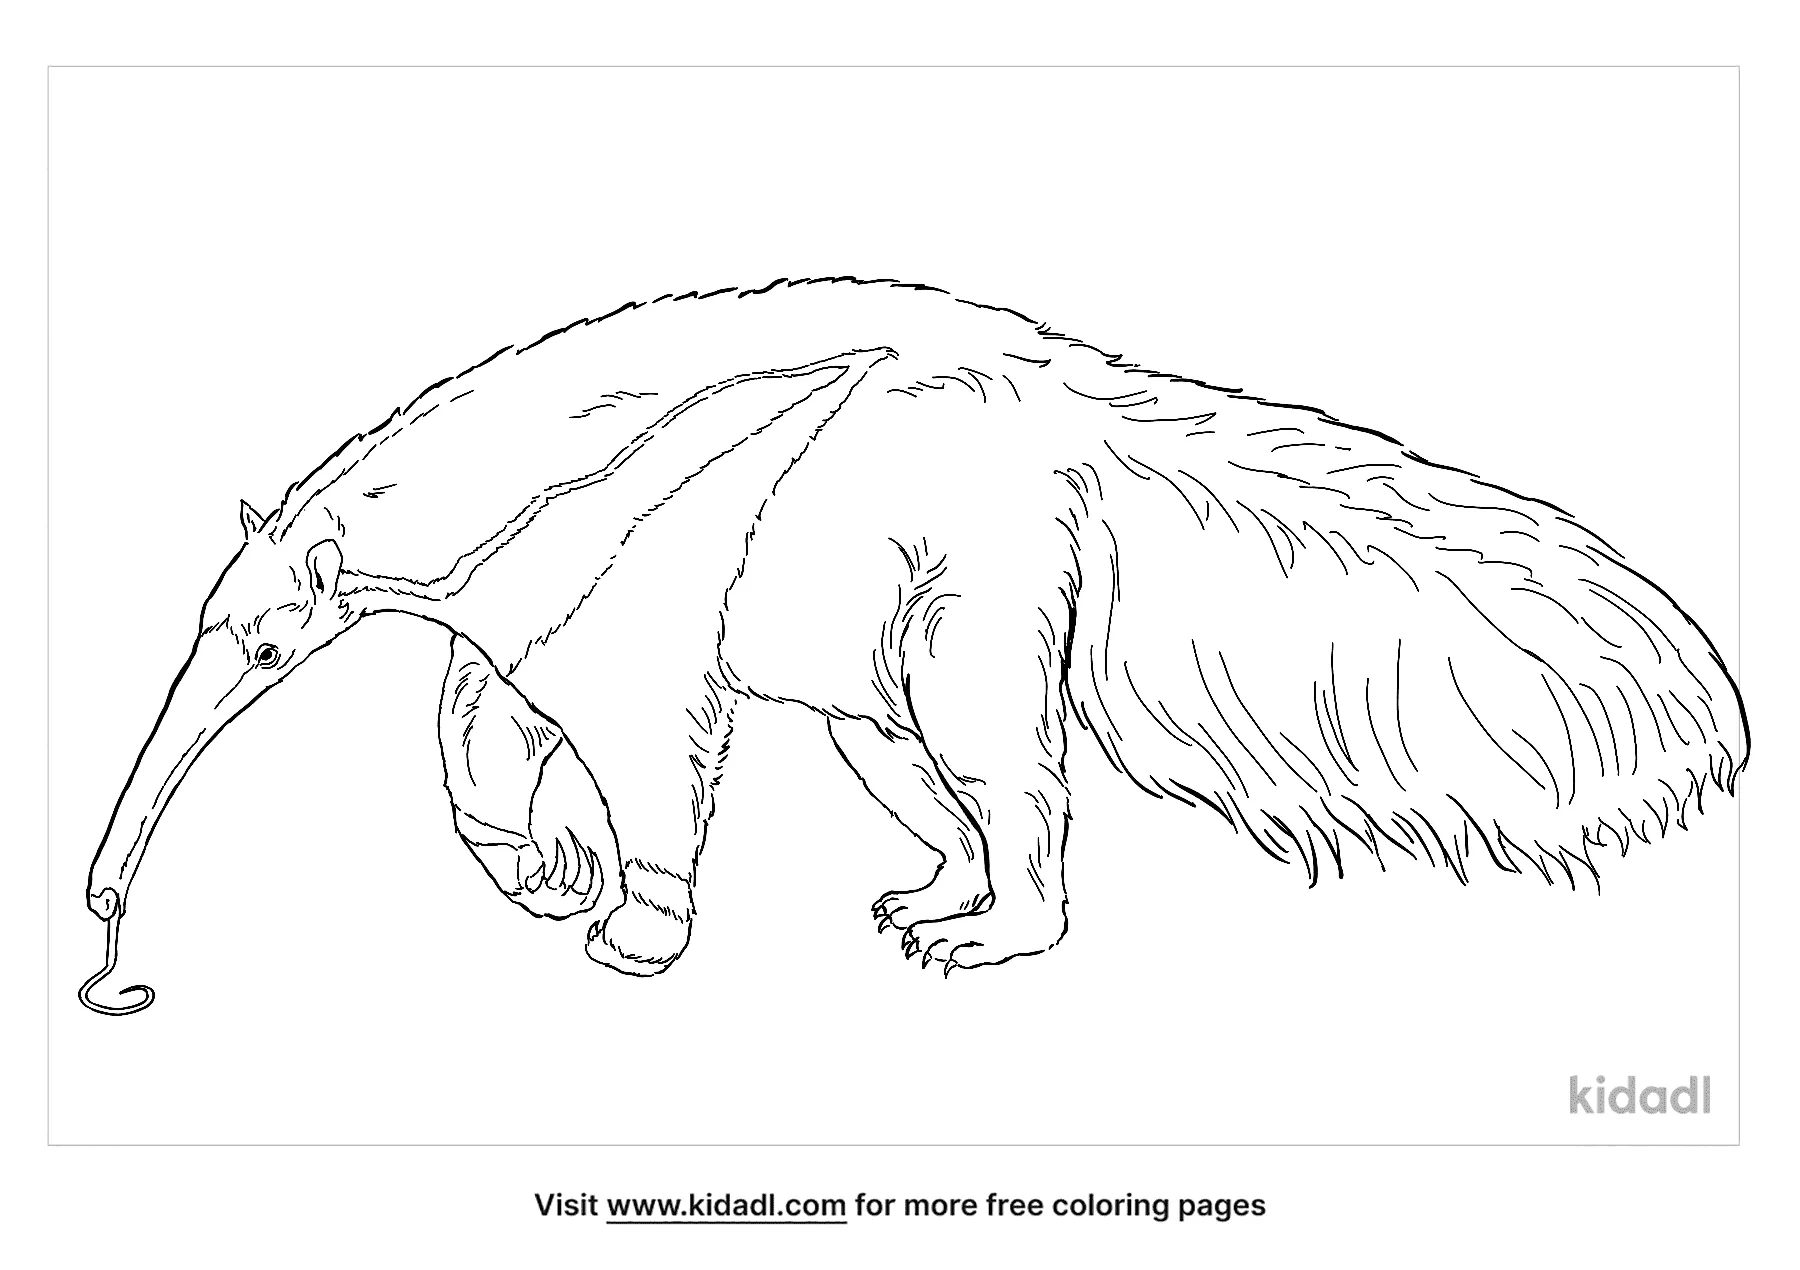 Giant Anteater Coloring Page   Free Mammals Coloring Page   Kidadl